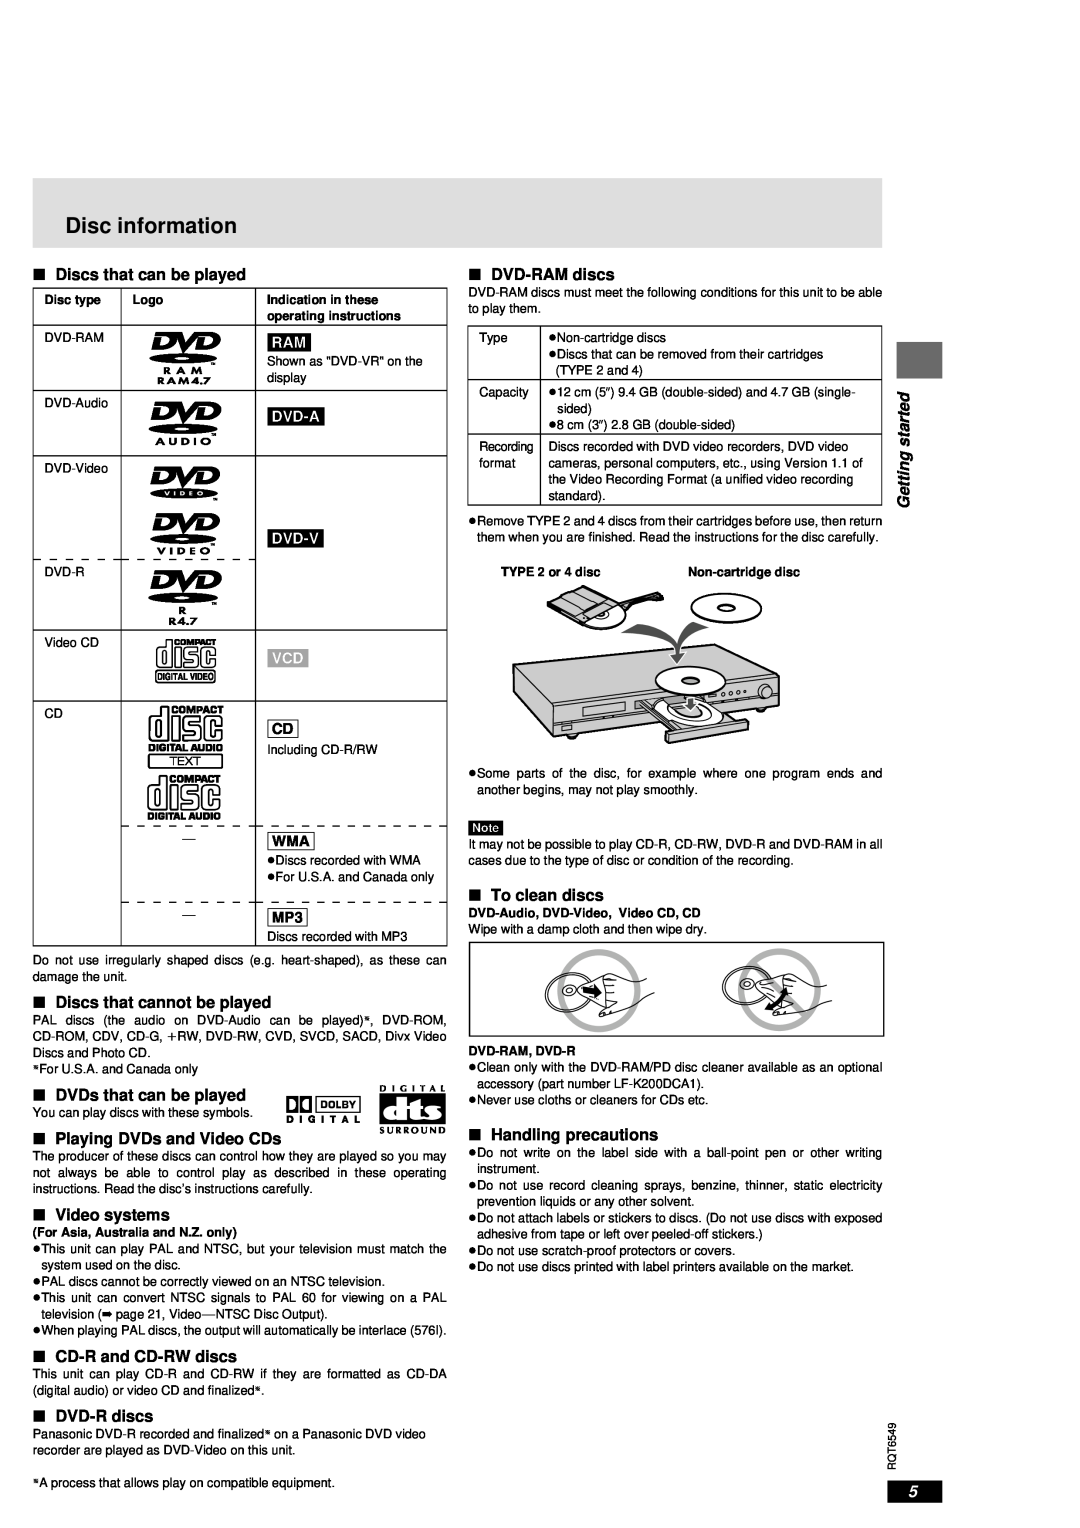 Panasonic DVD-RP82 warranty Disc information, Dvd-A, Dvd-V, ∫ Discs that can be played, ∫ Discs that cannot be played 